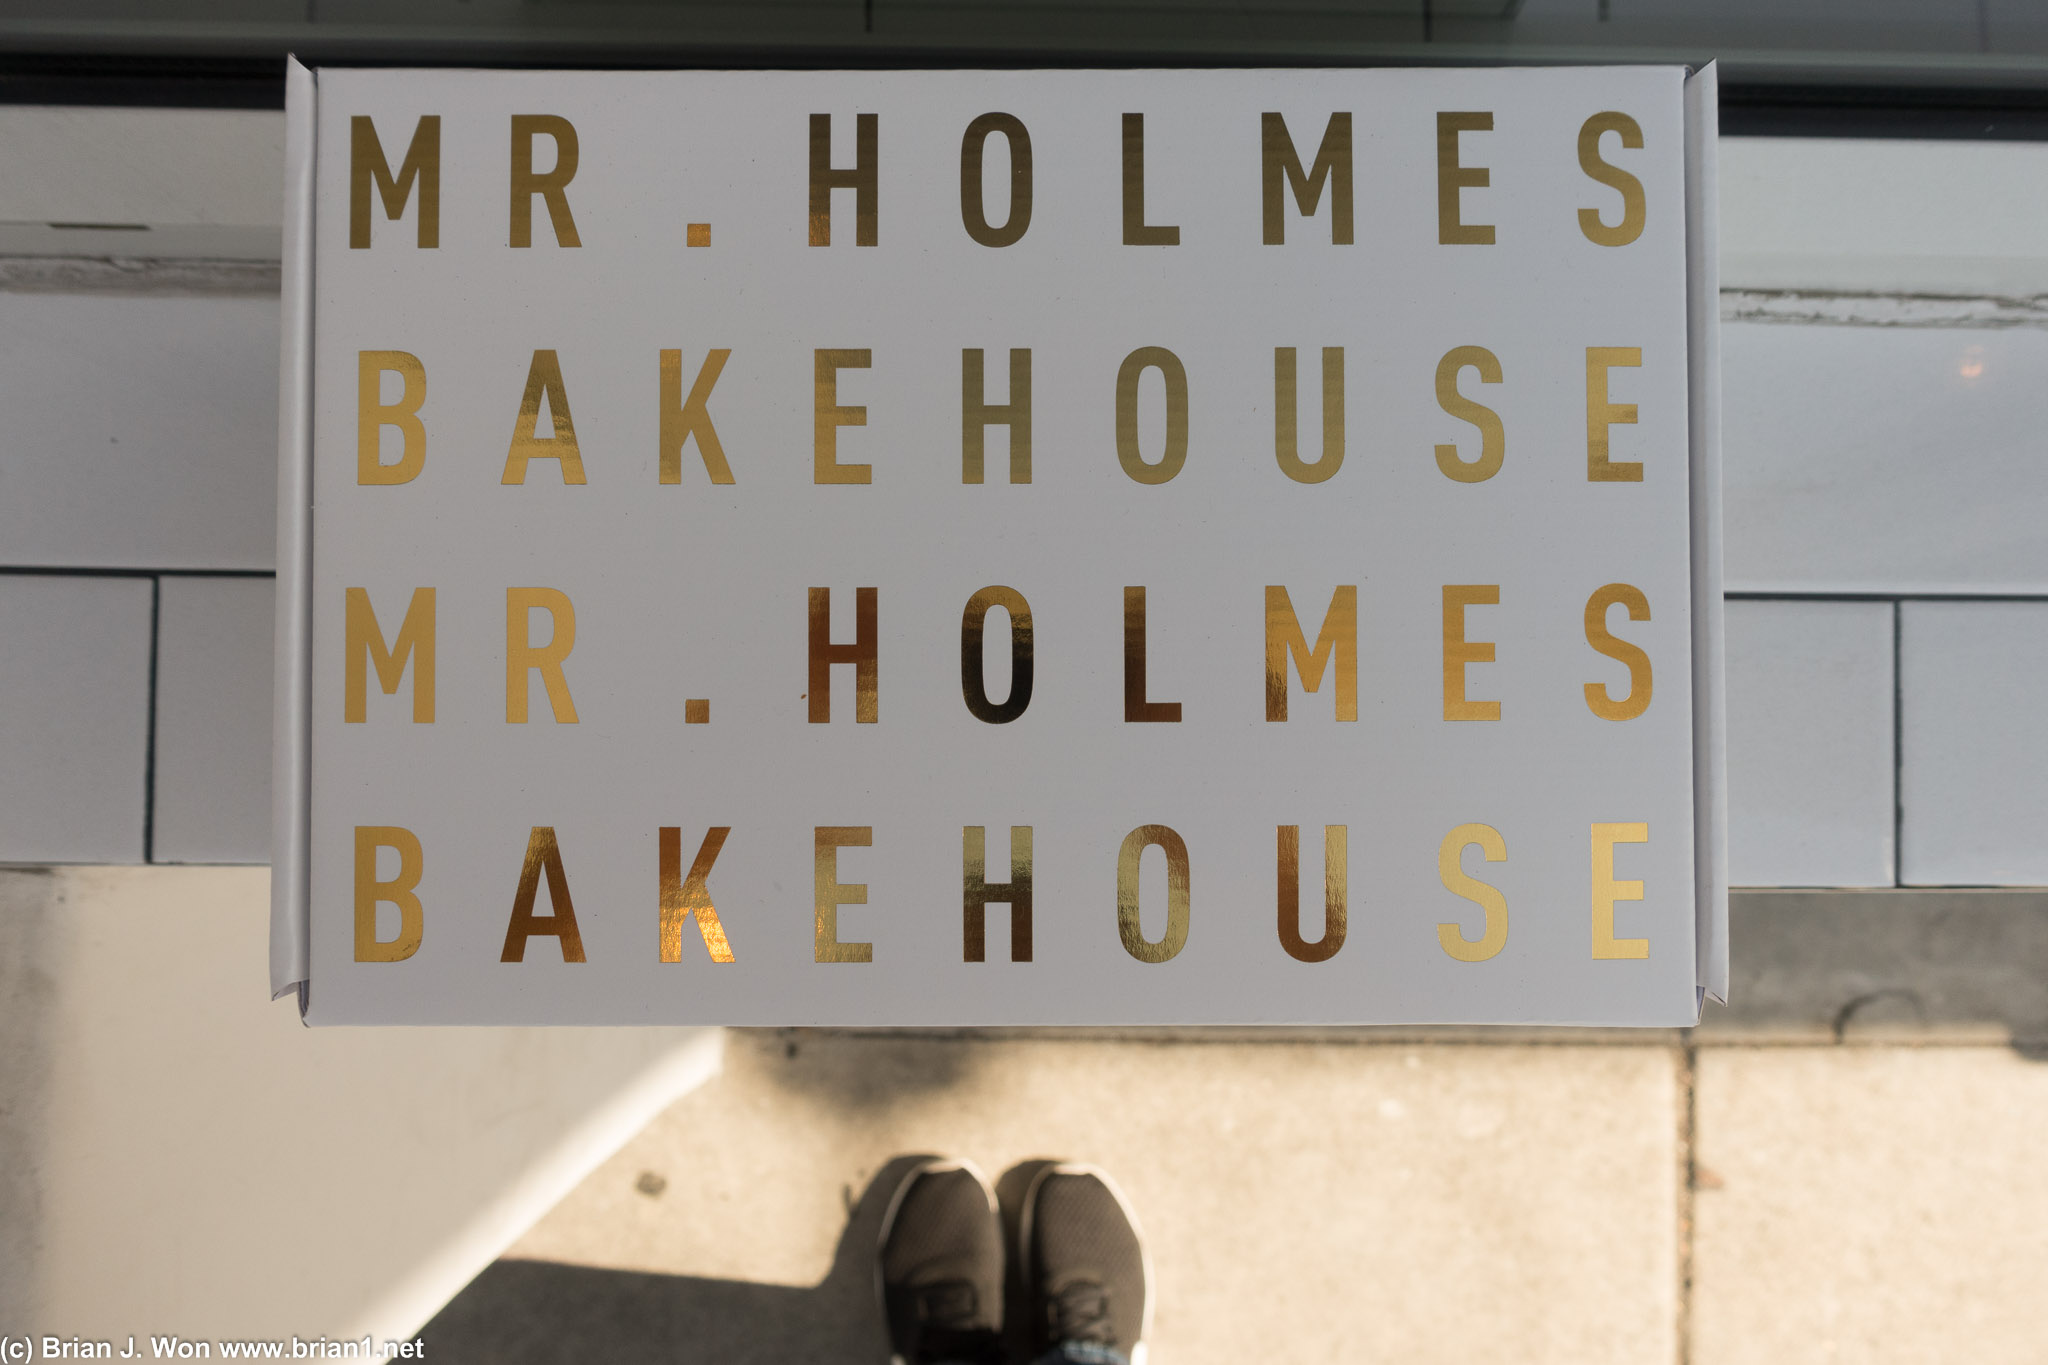 Wasn't planning to go back to Mr. Holmes Bakehouse, but I was in the area...